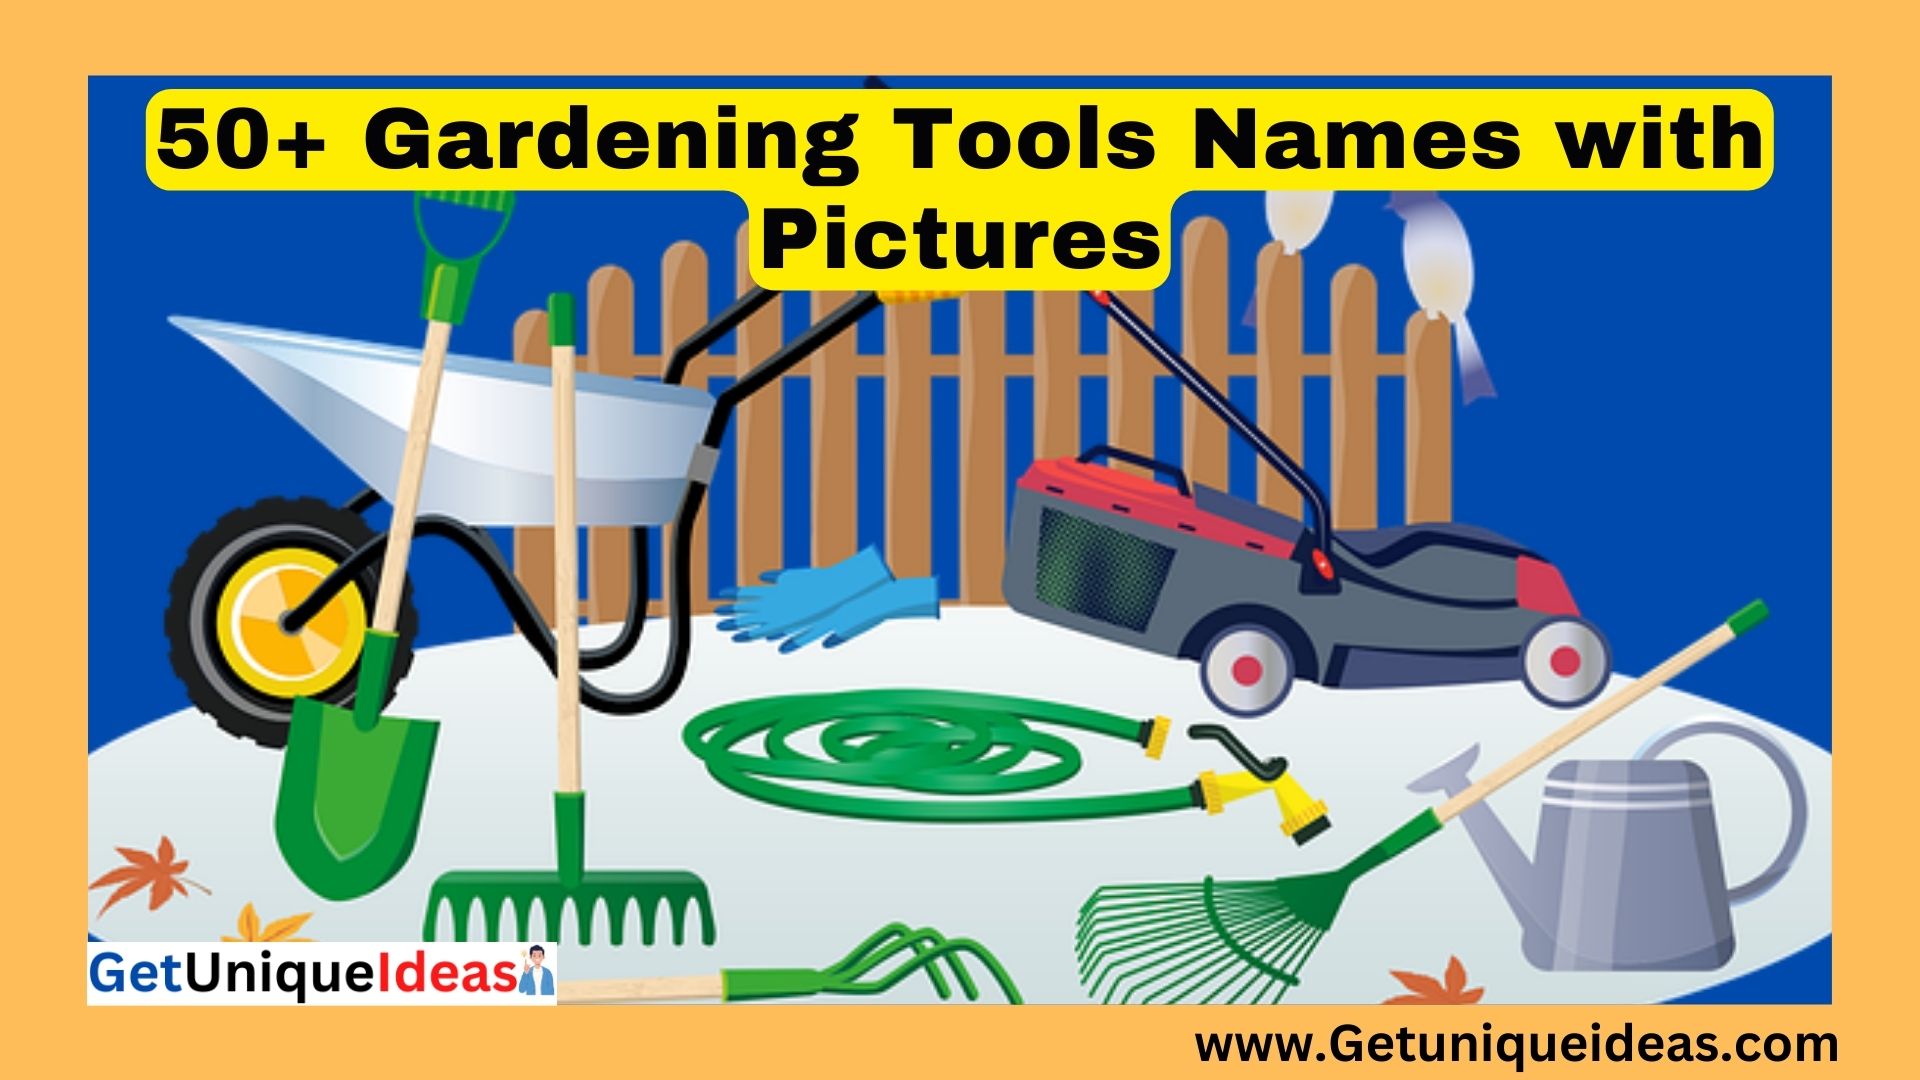 50+ Gardening Tools Names with Pictures